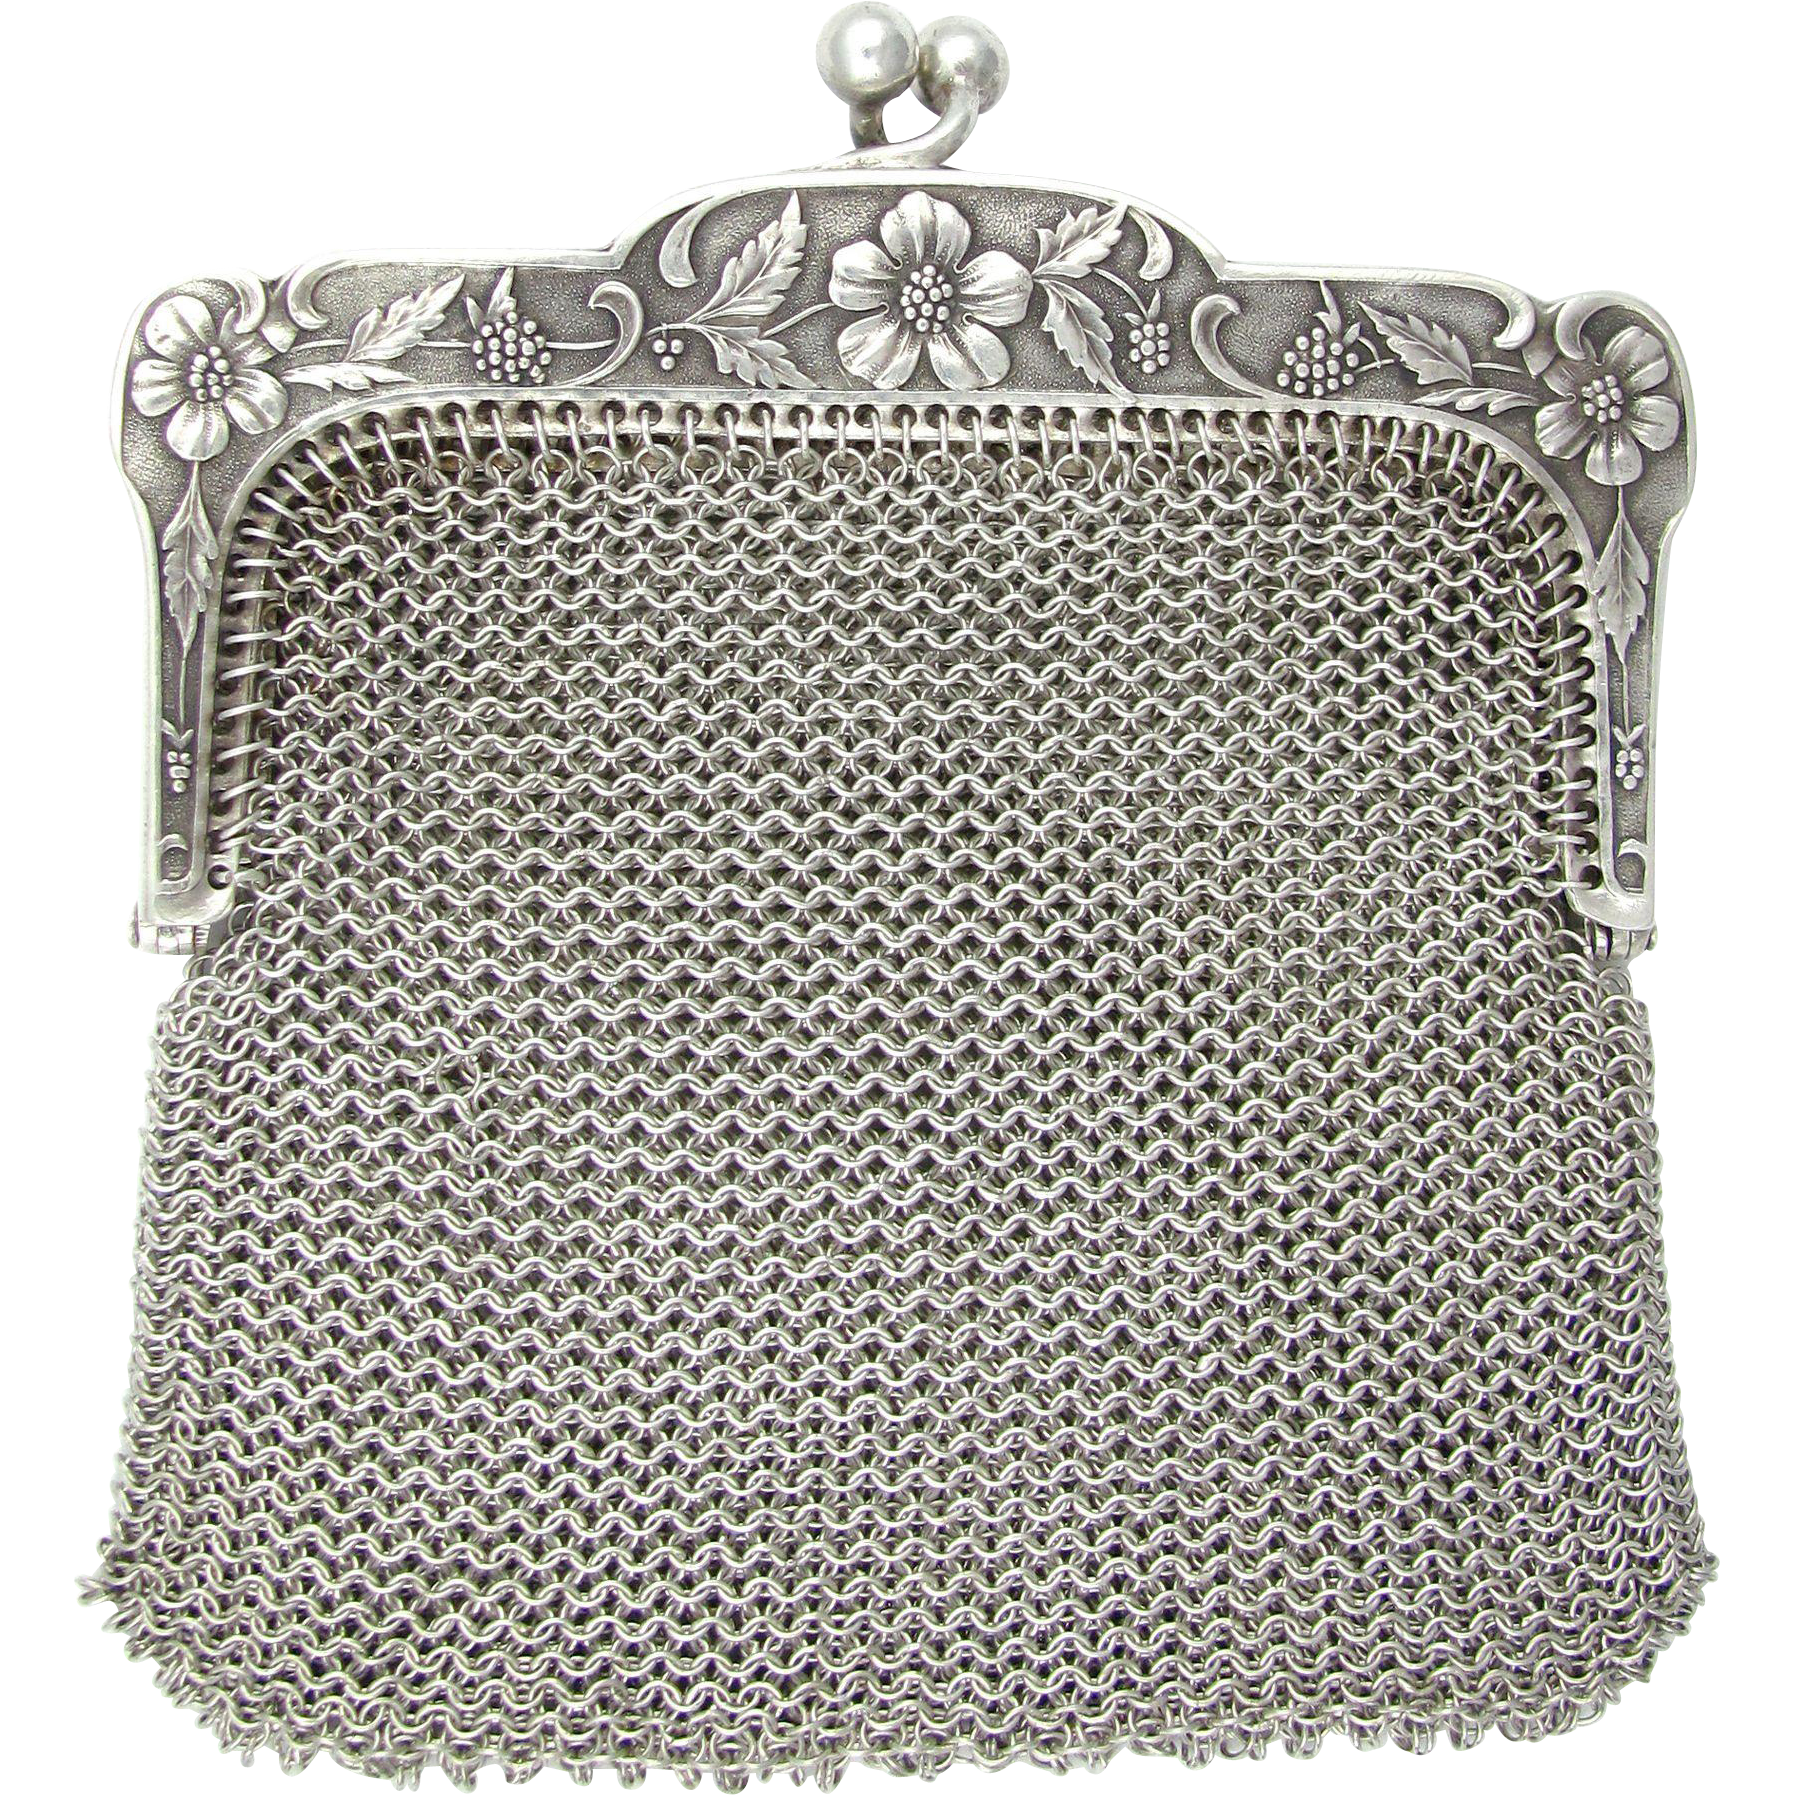 Antique French .800 Silver Chain Mail Mesh Chatelaine Purse, Flowers & Berries